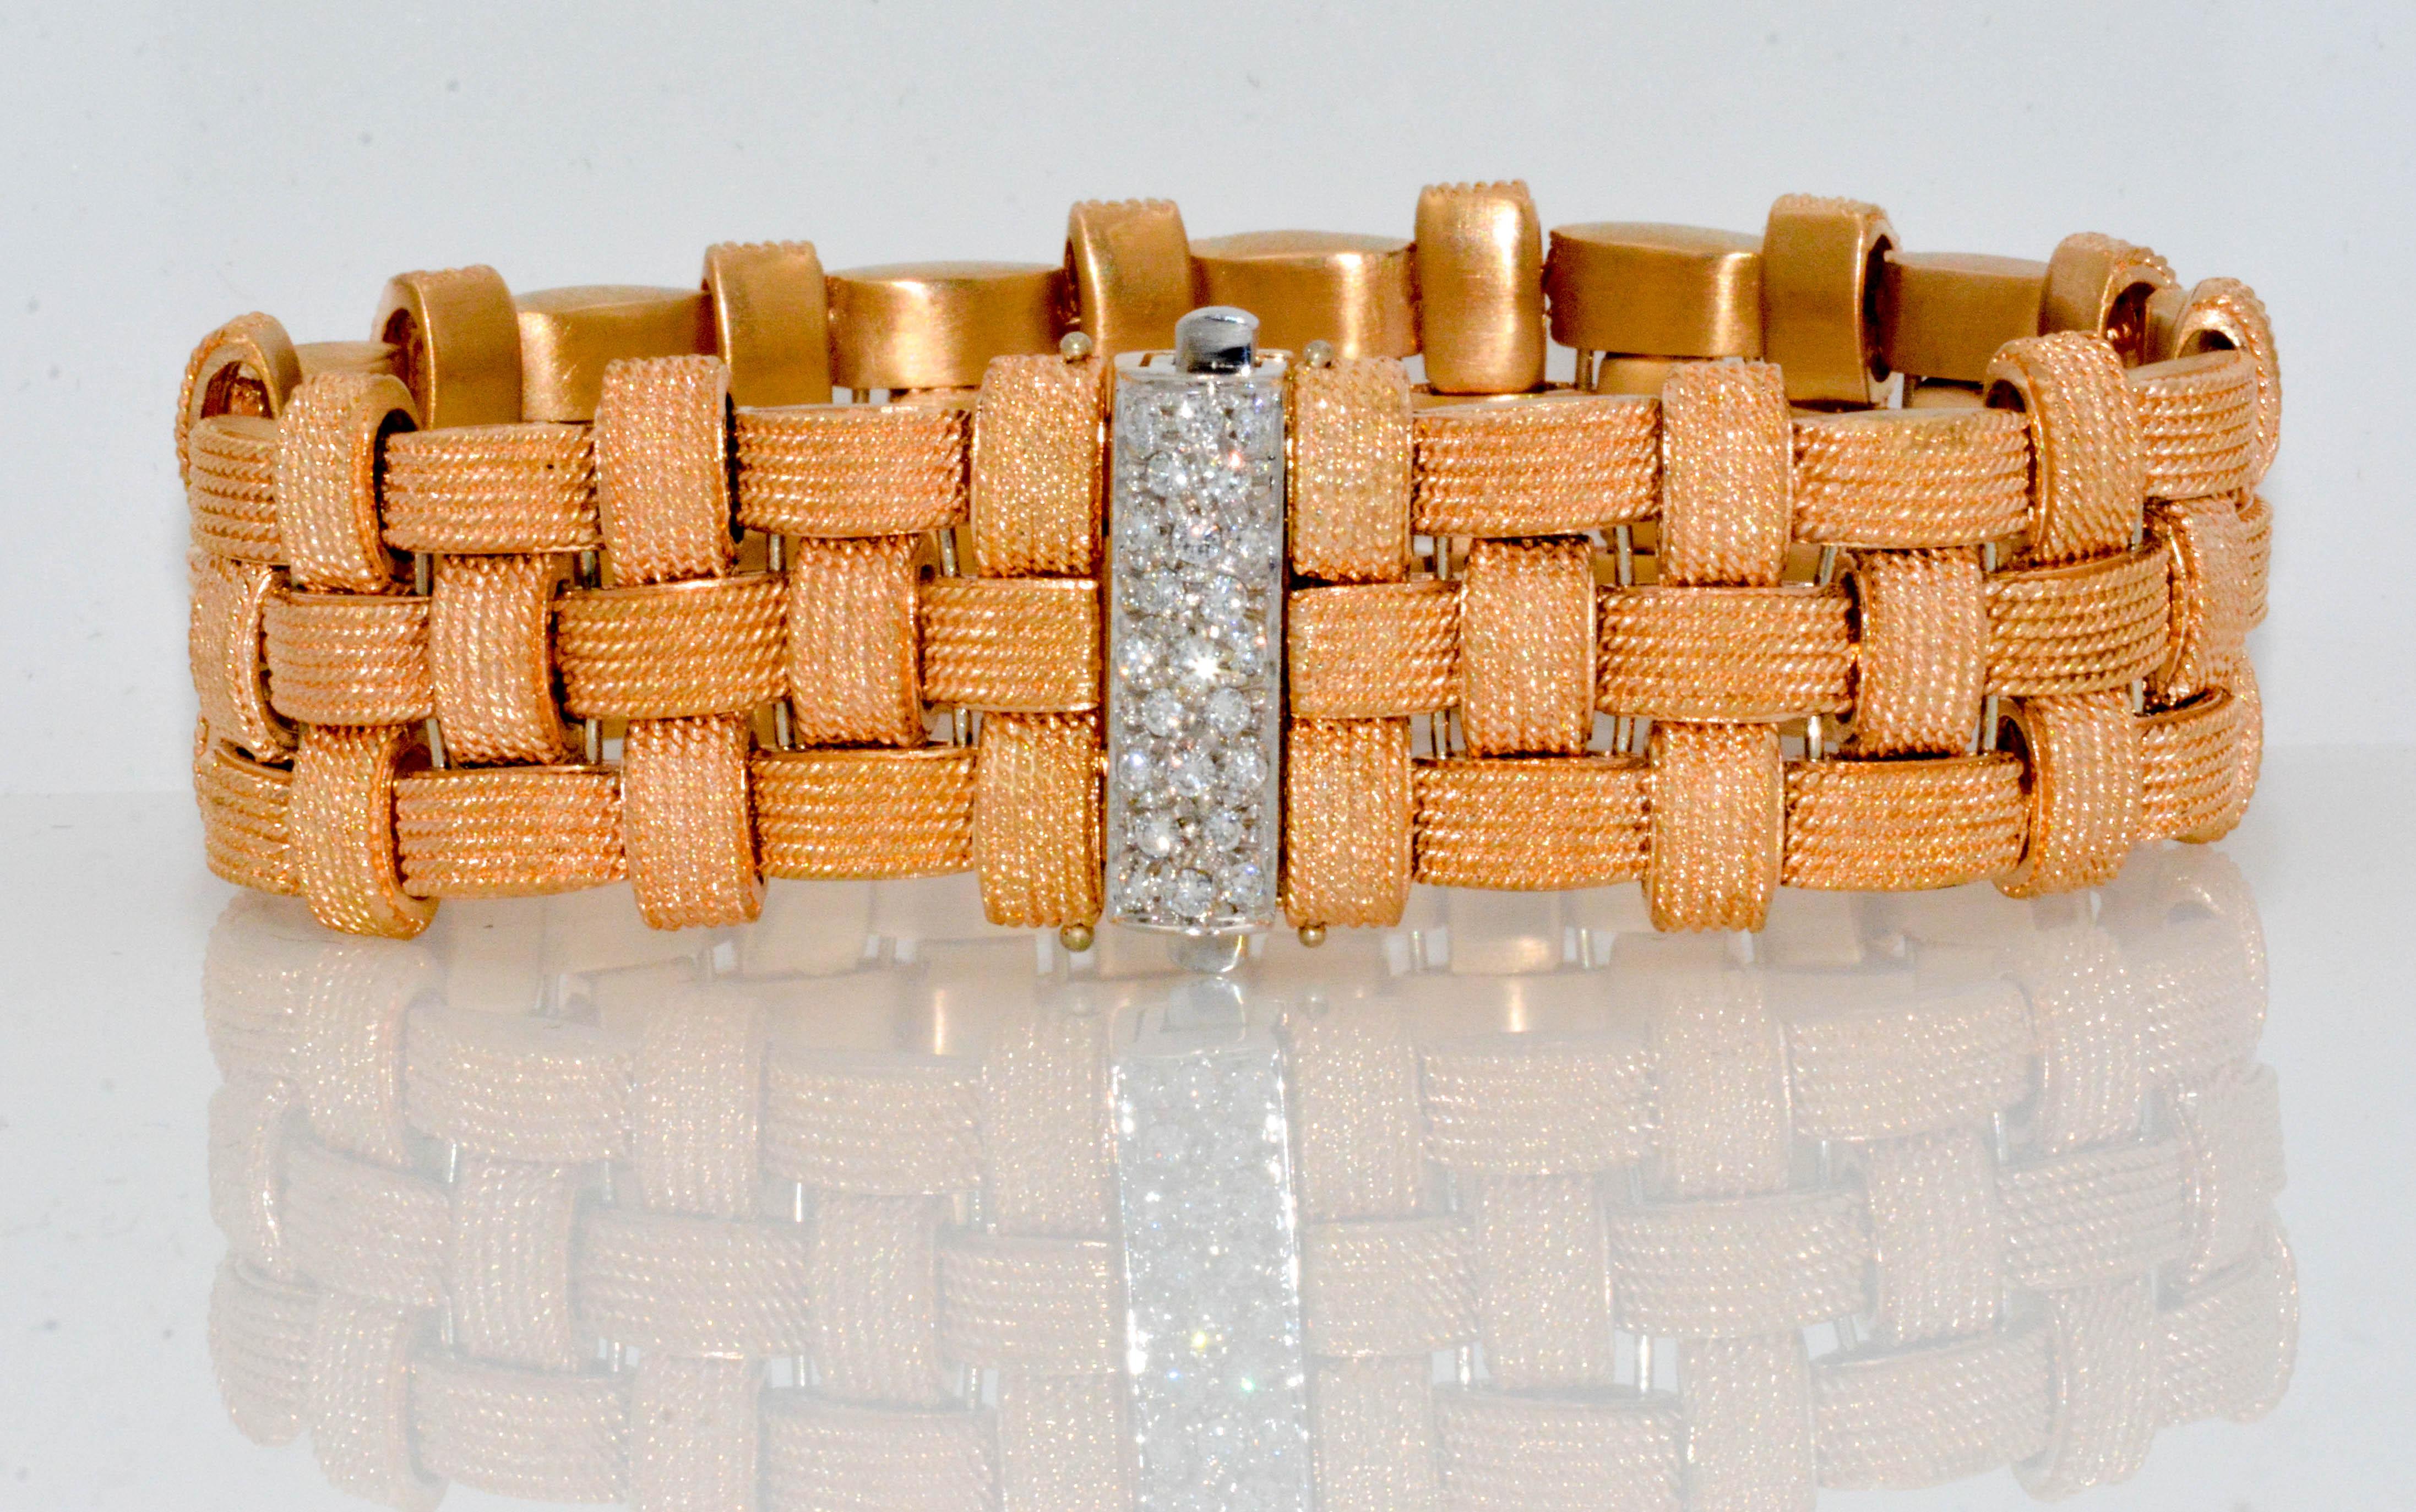 Our elegant 18 karat rose gold Roberto Coin bracelet is the perfect choice for festivities day through evening with it's 3 rows of woven rose gold that feels like it's worth a million. This Italian design is luxurious adorned with an 18 karat white